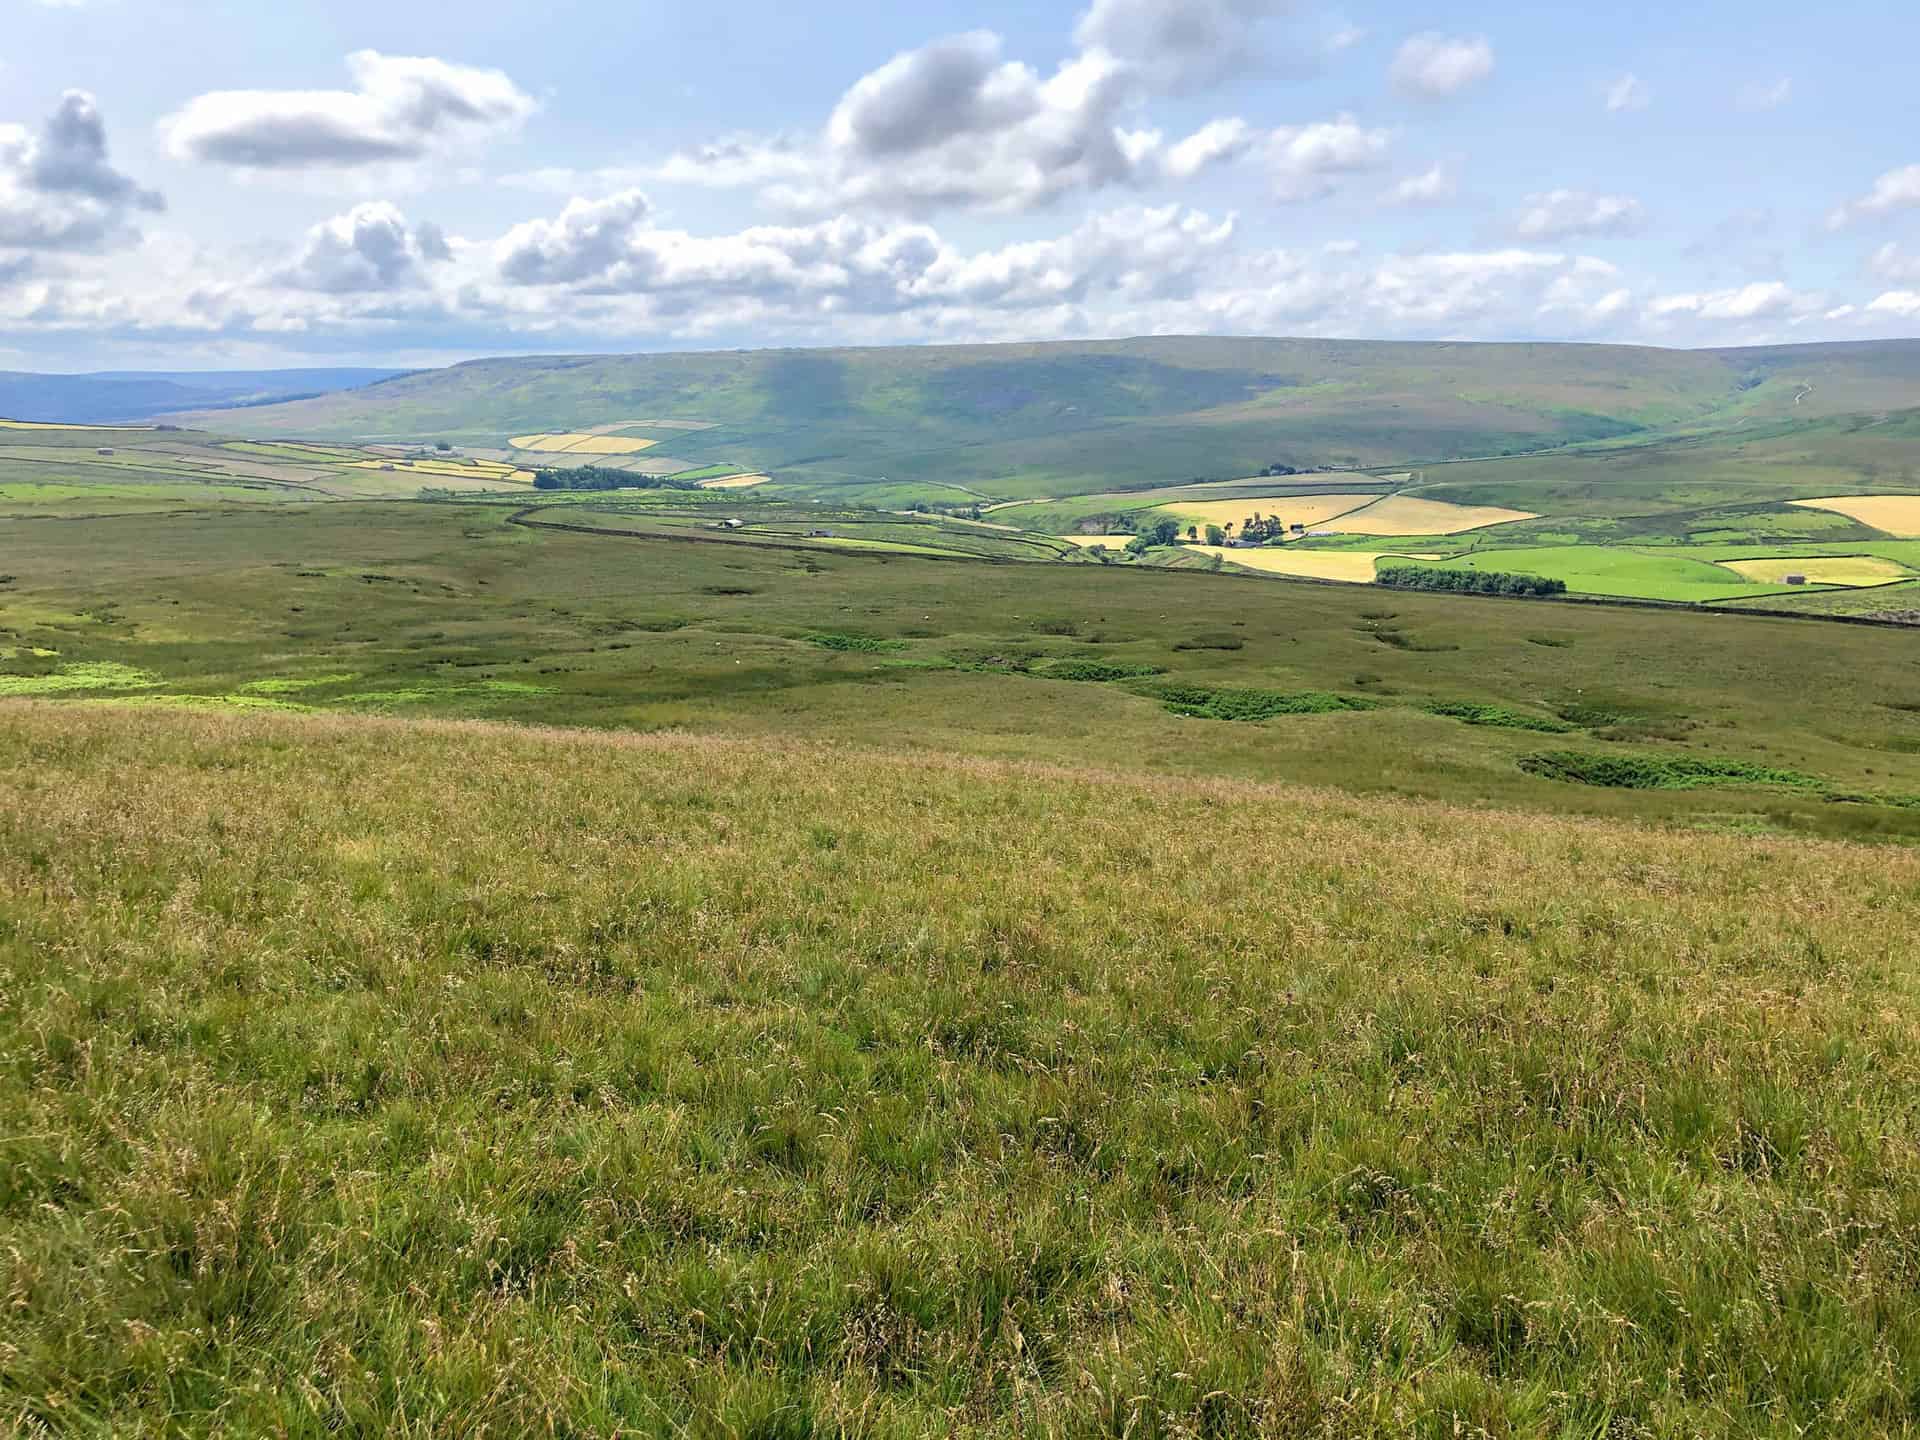 The view south-east from Baxton Knab towards Arkengarthdale. Baxton Knab is the halfway point of this Bowes walk.